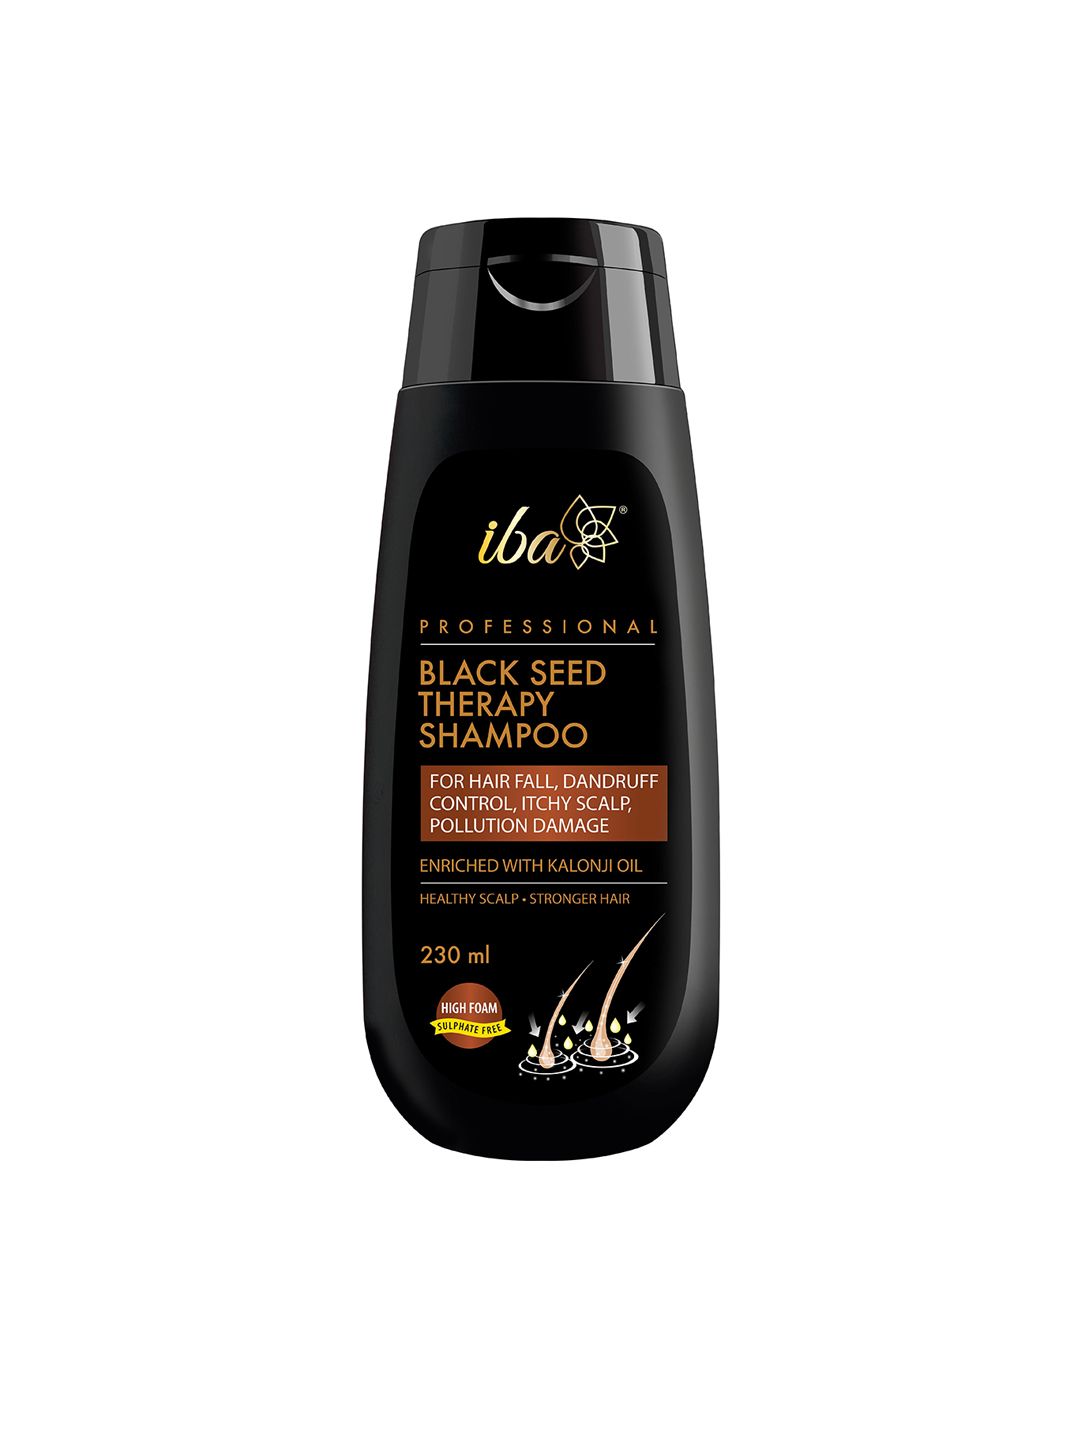 Iba Professional Black Seed Therapy Shampoo - 230 ml Price in India